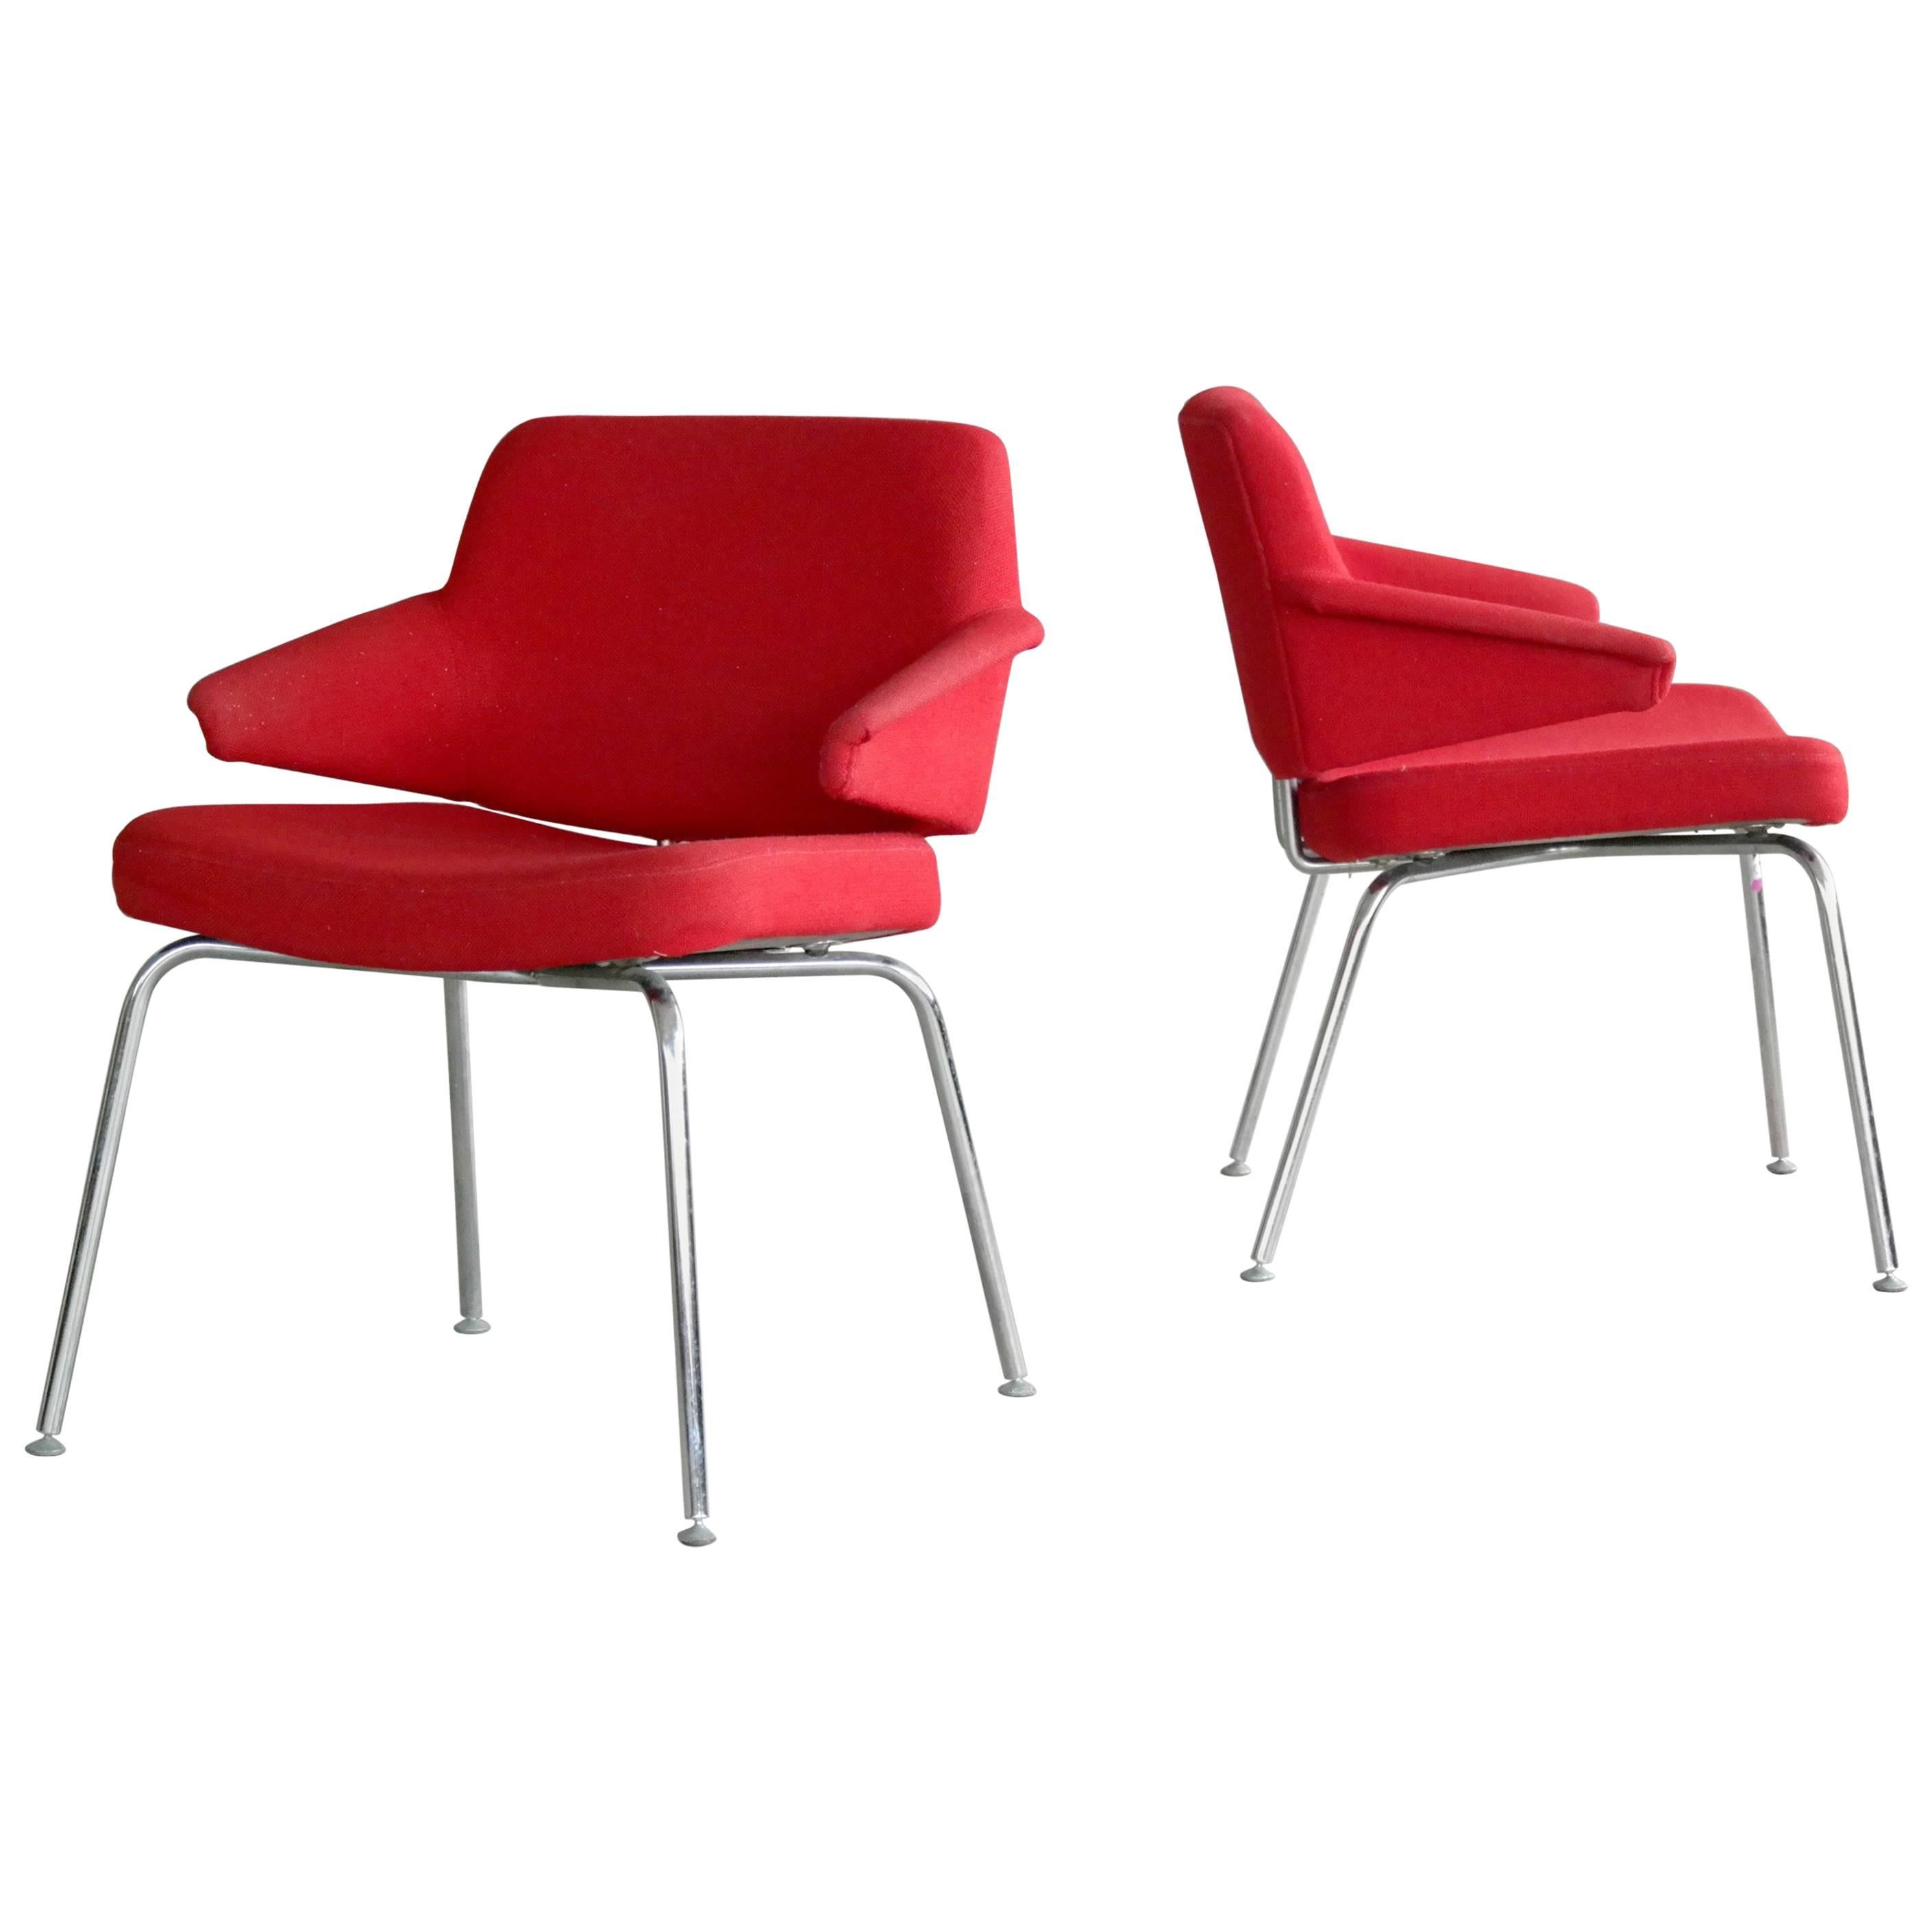 Danish Midcentury Airport Style Lounge or Side Chairs by Duba Møbelindustri